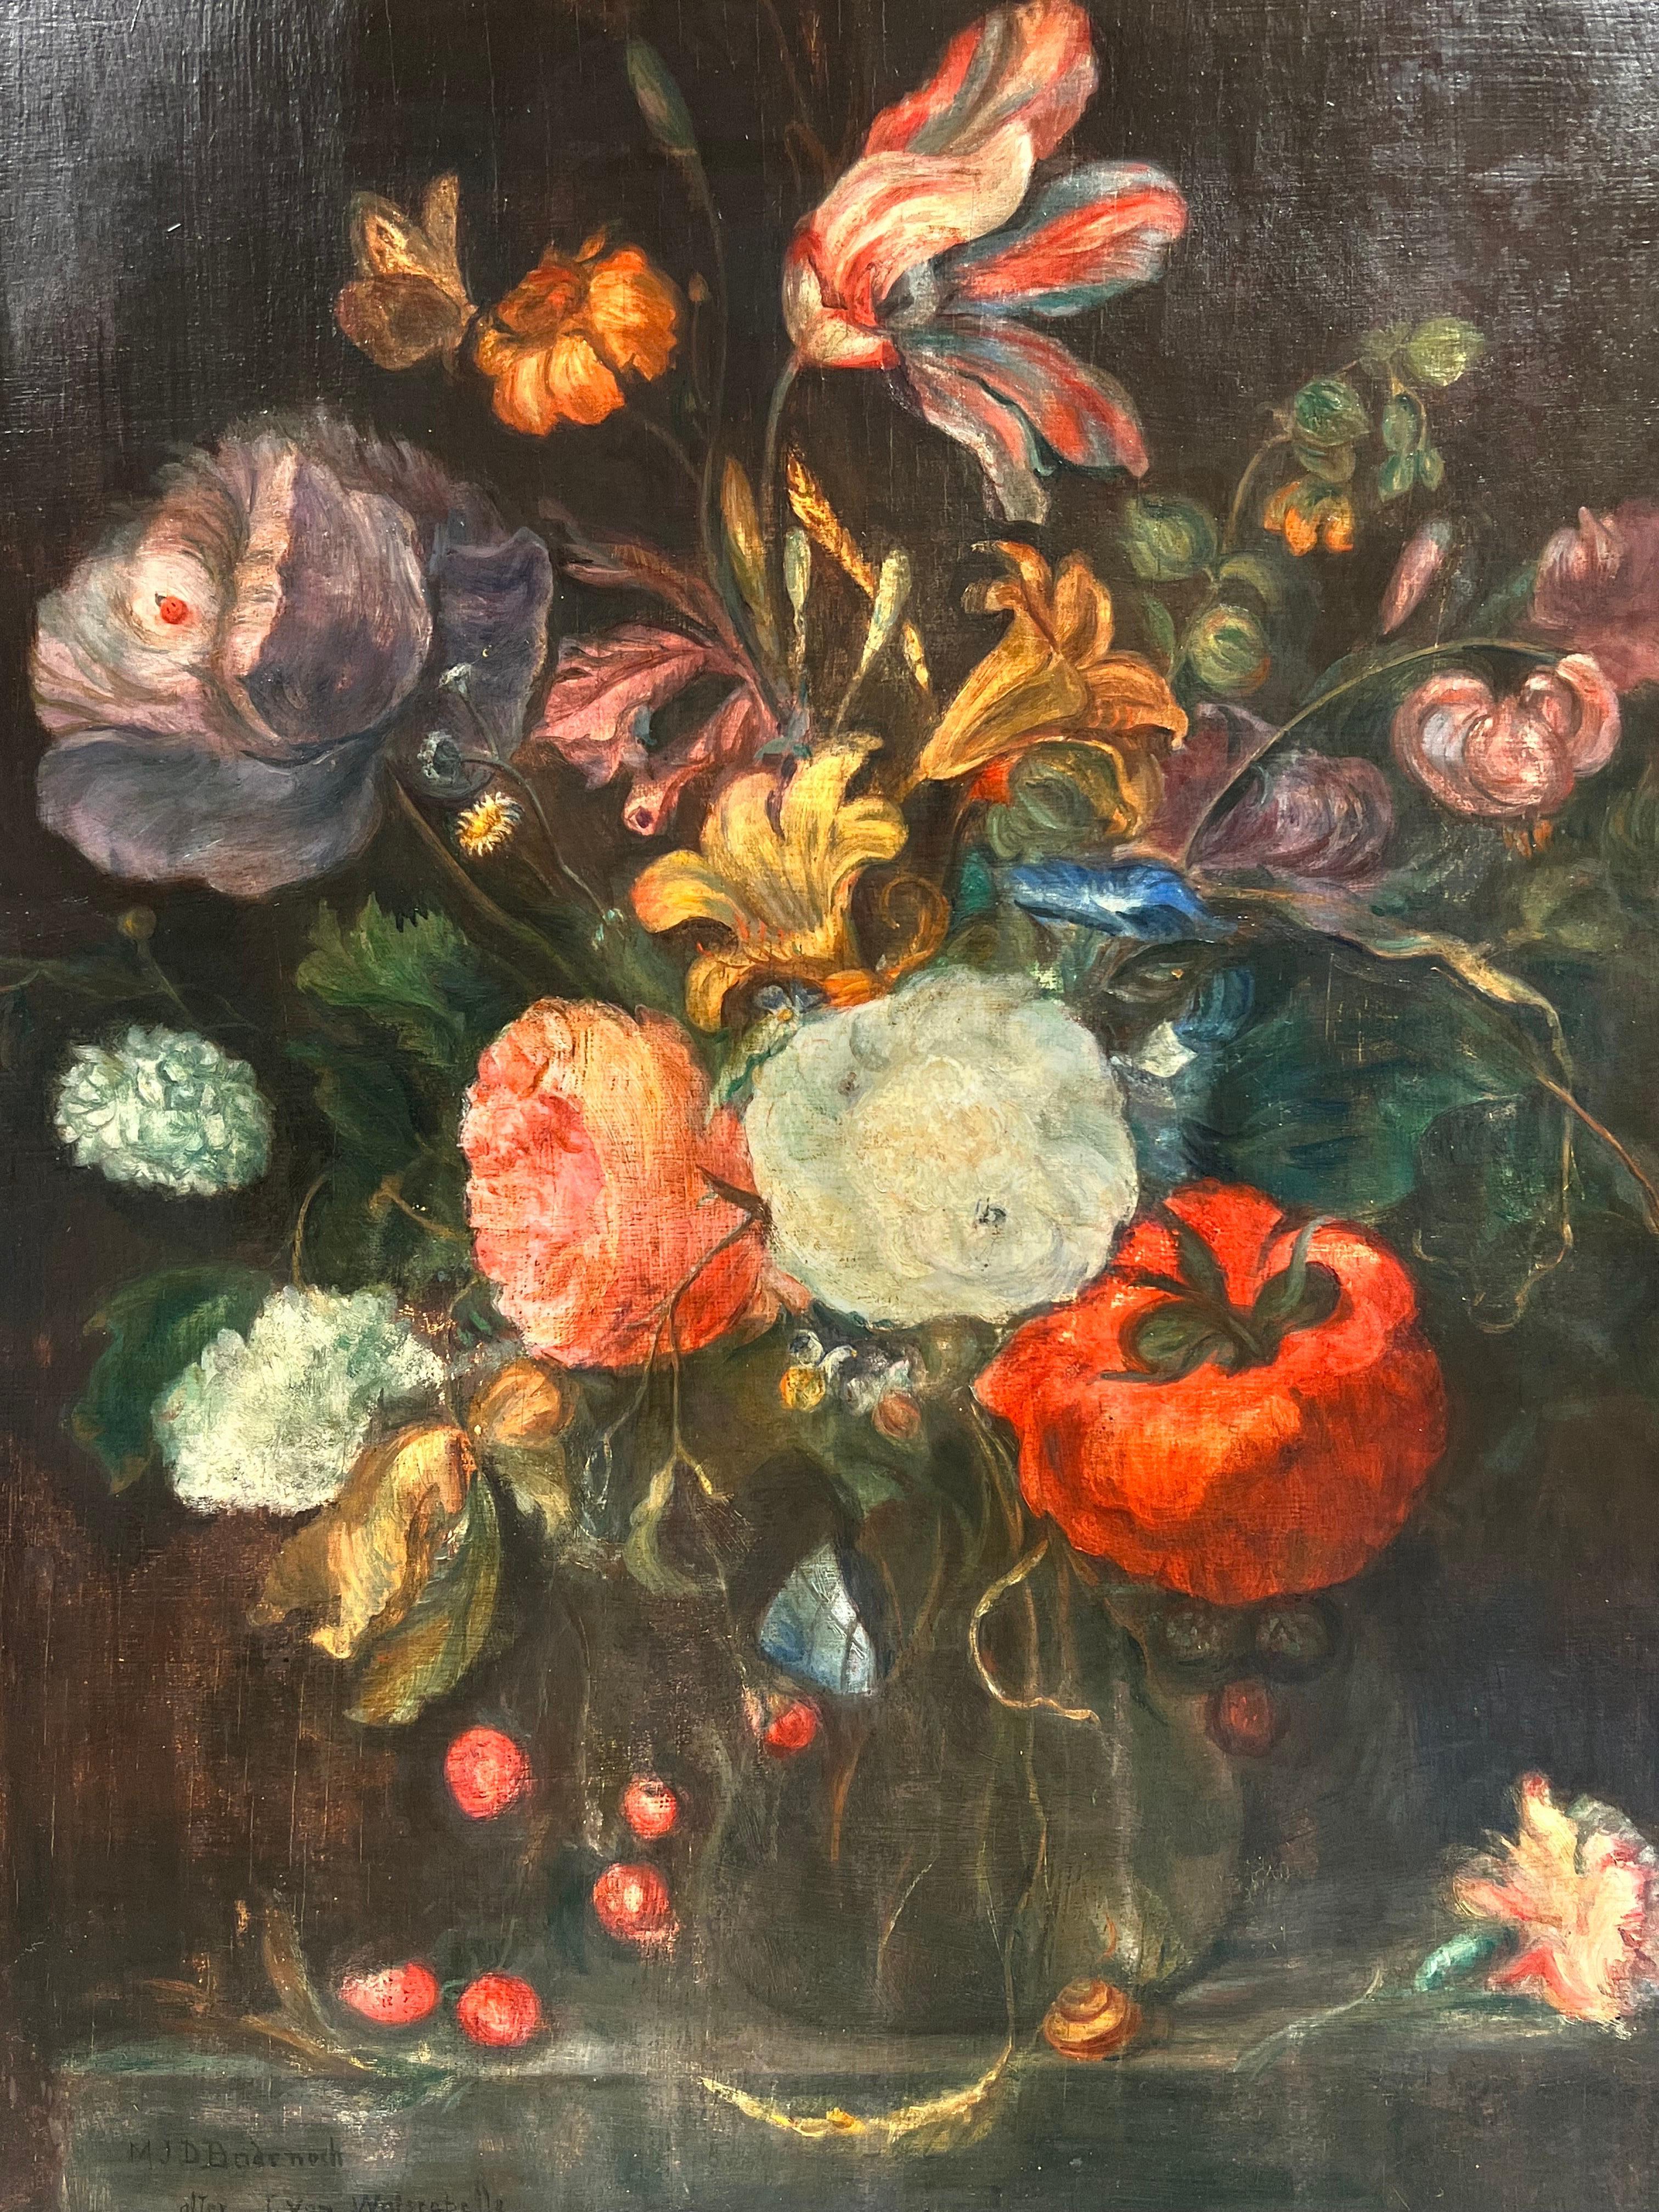 Artist/ School: English School, early 20th century, signed and inscribed

Title: Classical Still Life

Medium: oil on board, framed

Framed: 33 x 27 inches
Painting: 29 x 22 inches

Provenance: private collection, England

Condition: The painting is